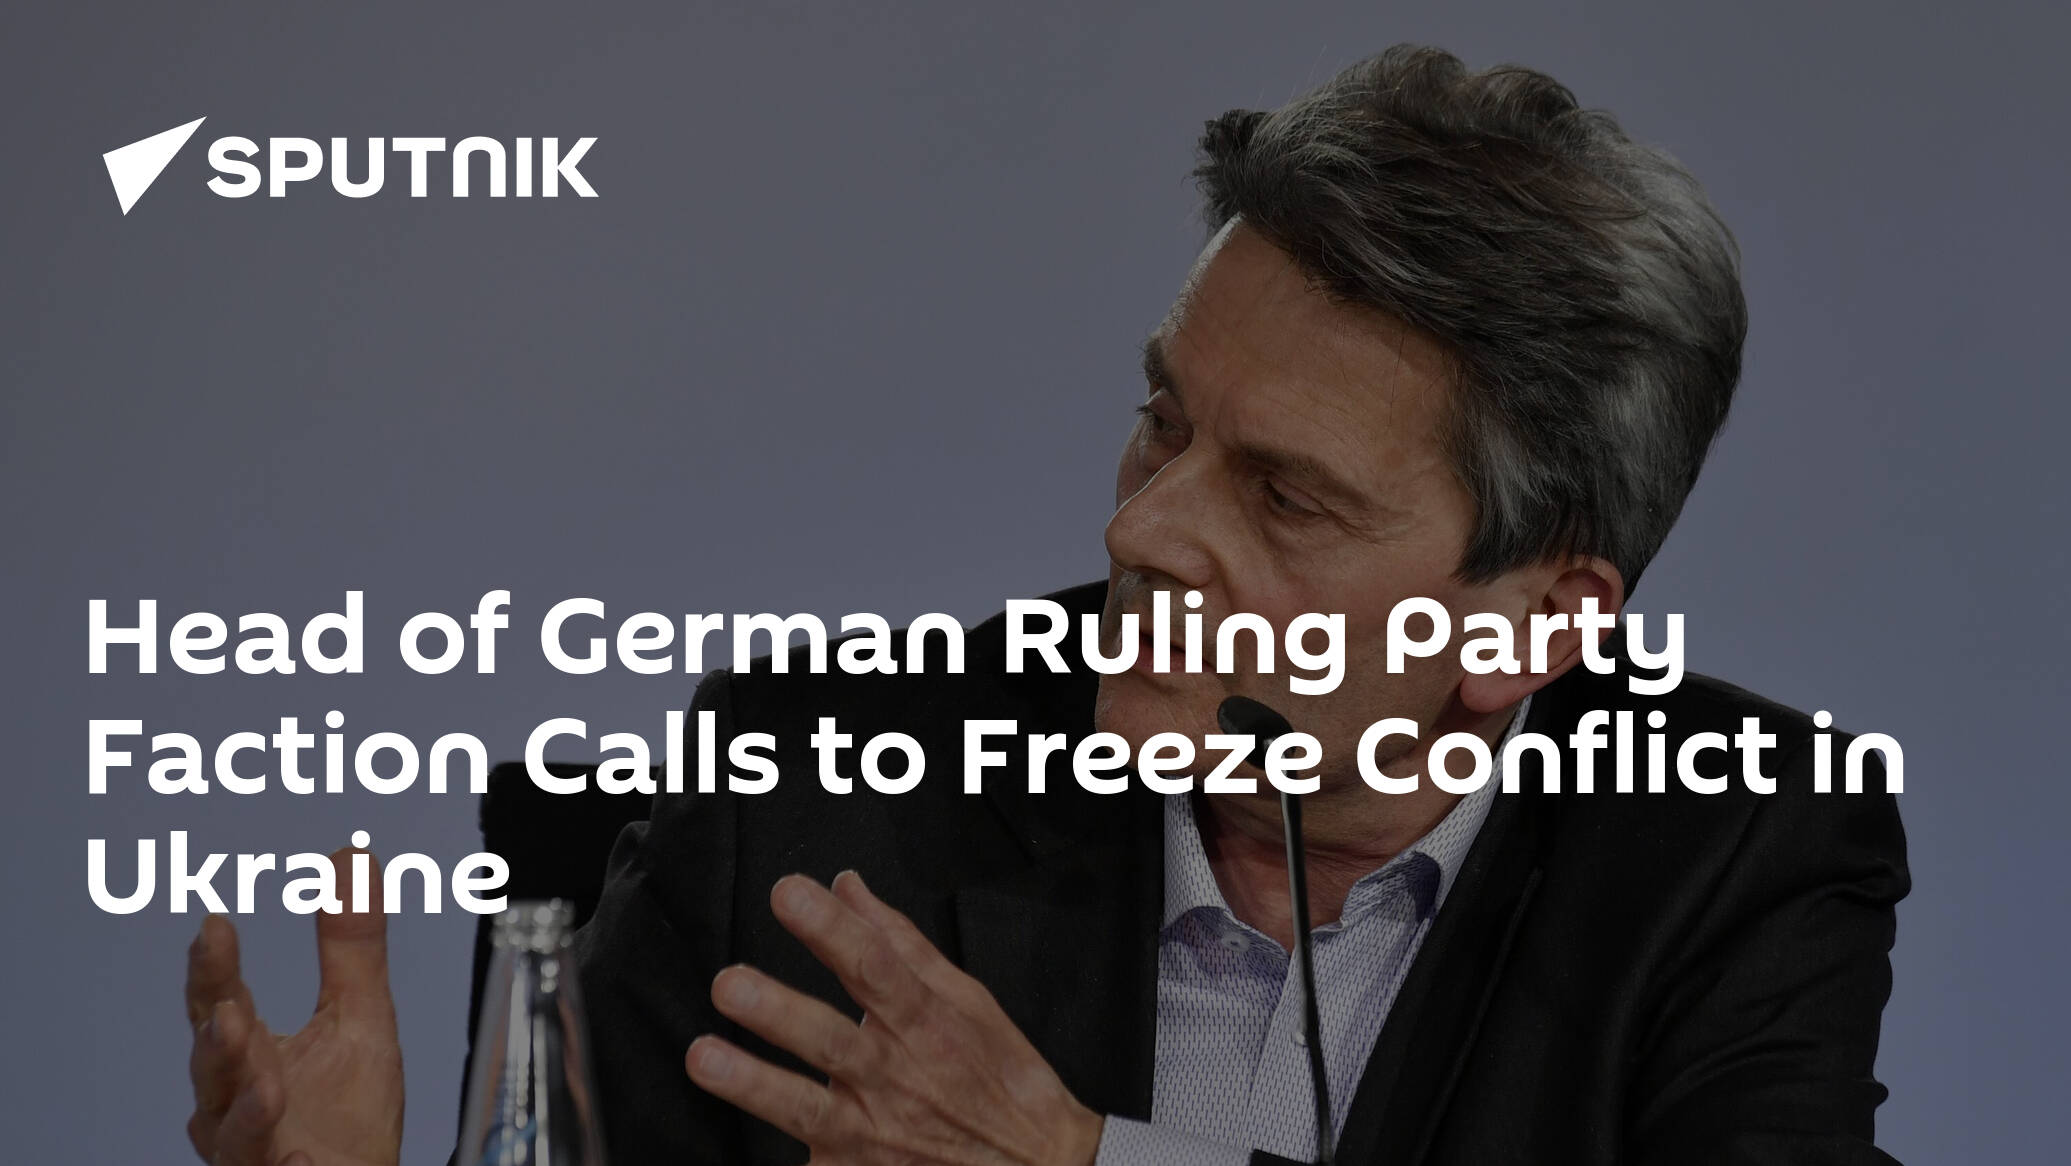 Head of German Ruling Party Faction Calls to Freeze Conflict in Ukraine